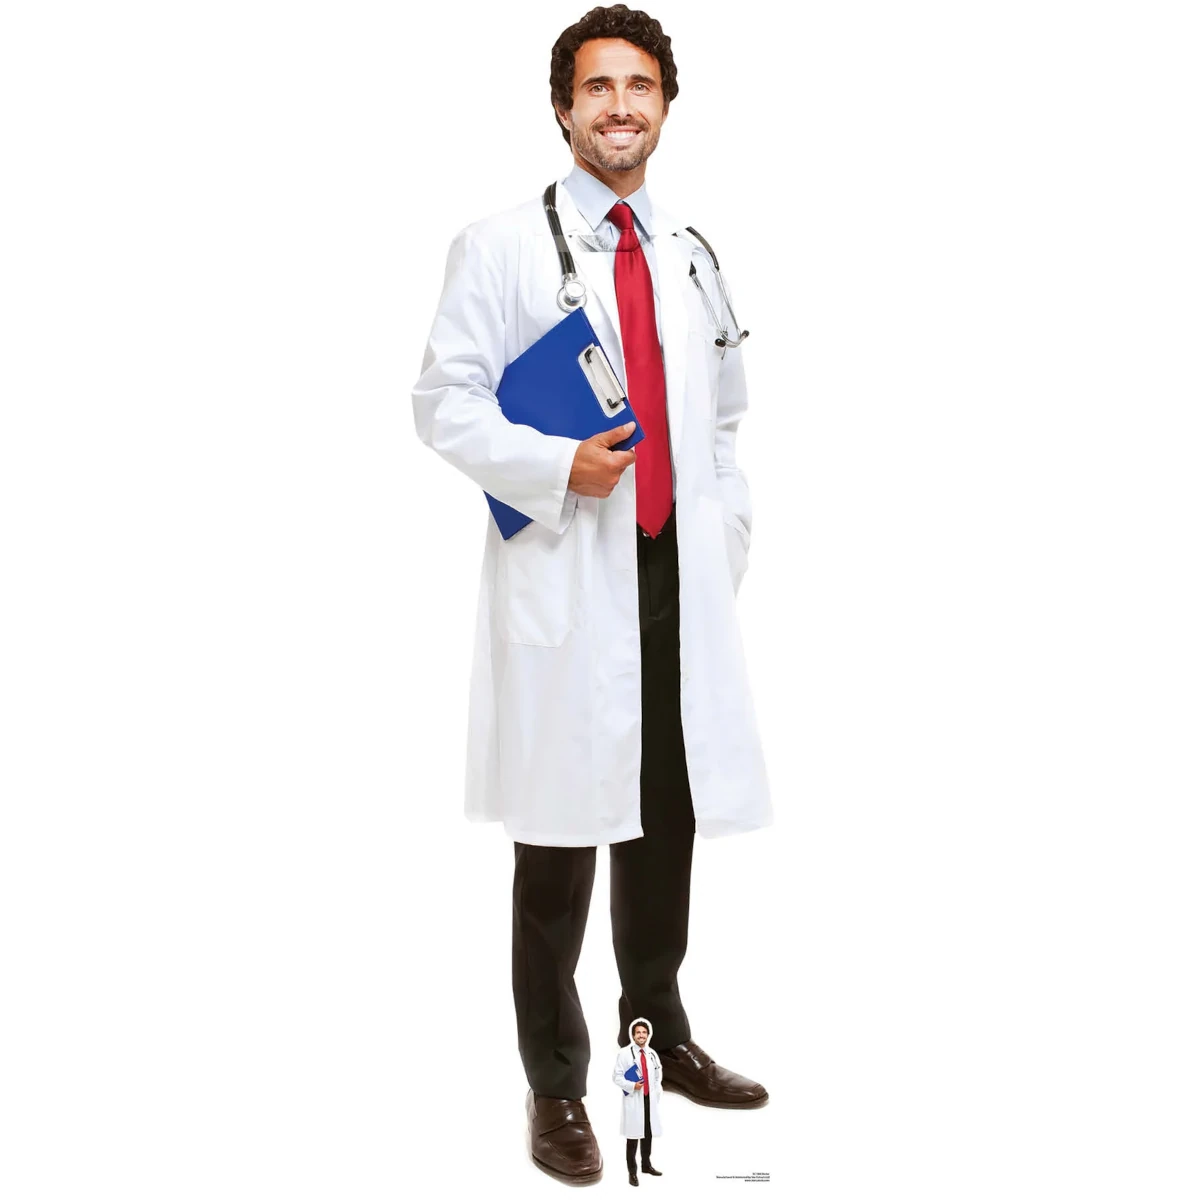 SC1584 Male Doctor Health Worker Lifesize + Mini Cardboard Cutout Standee Front